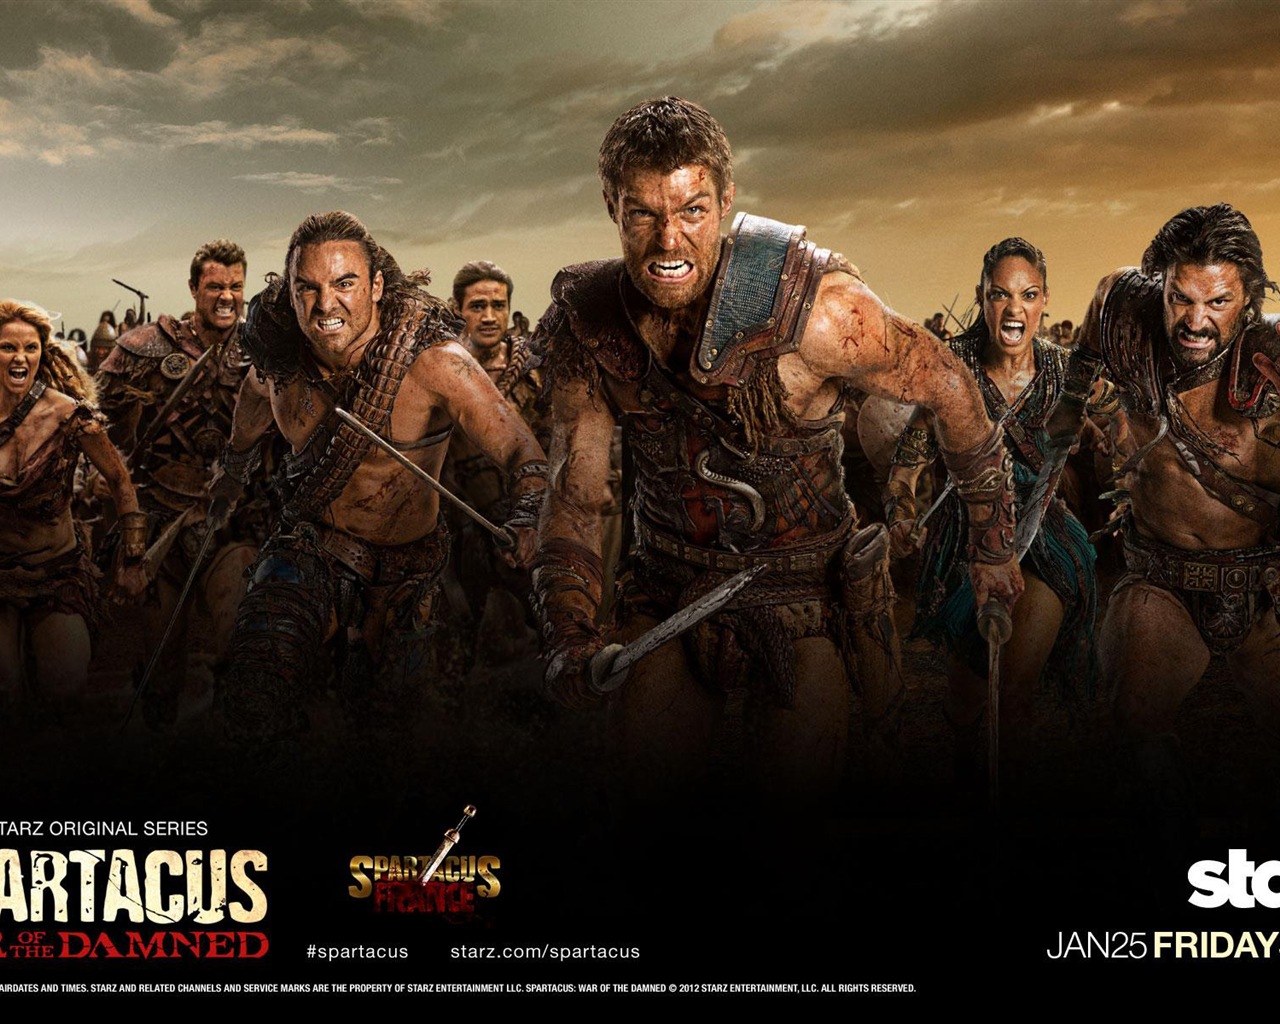 Spartacus: War of the Damned HD wallpapers #1 - 1280x1024